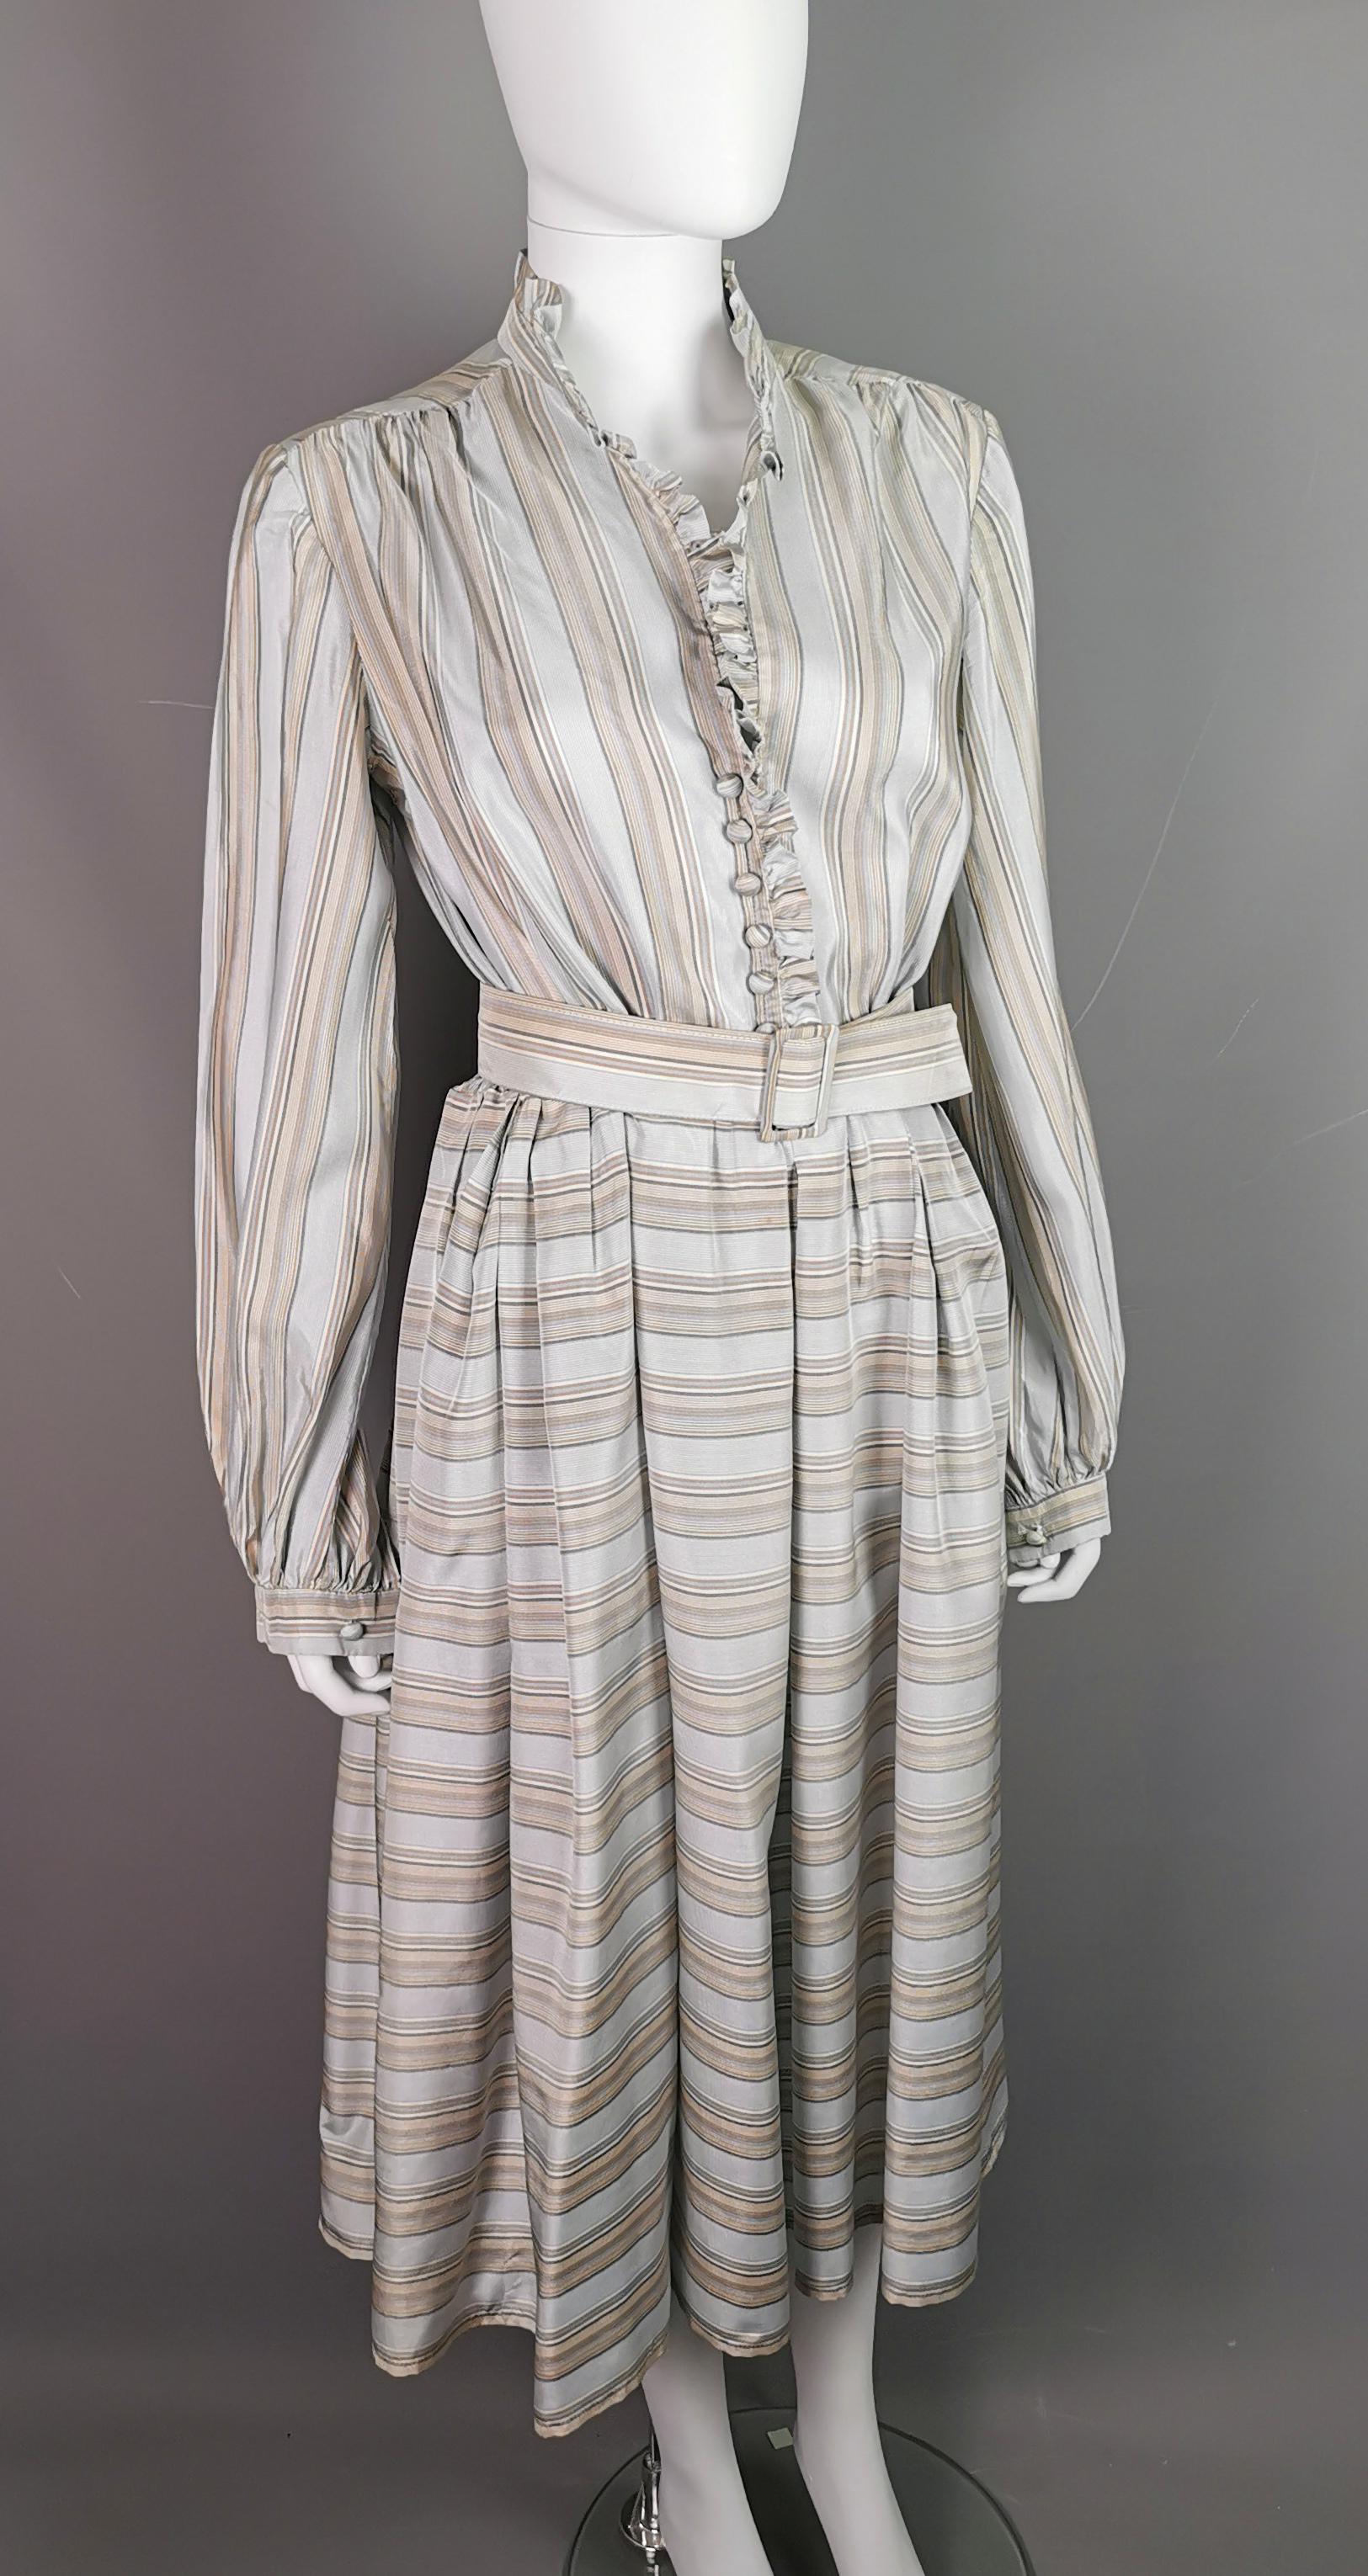 A gorgeous vintage c1970s pure silk shirtwaist dress.

It is a mid length dress with long bishop style sleeves, a v neck ruffle neckline and a full skirt.

The dress has a matching belt making the pulled in waist look seamless.

It has a striped